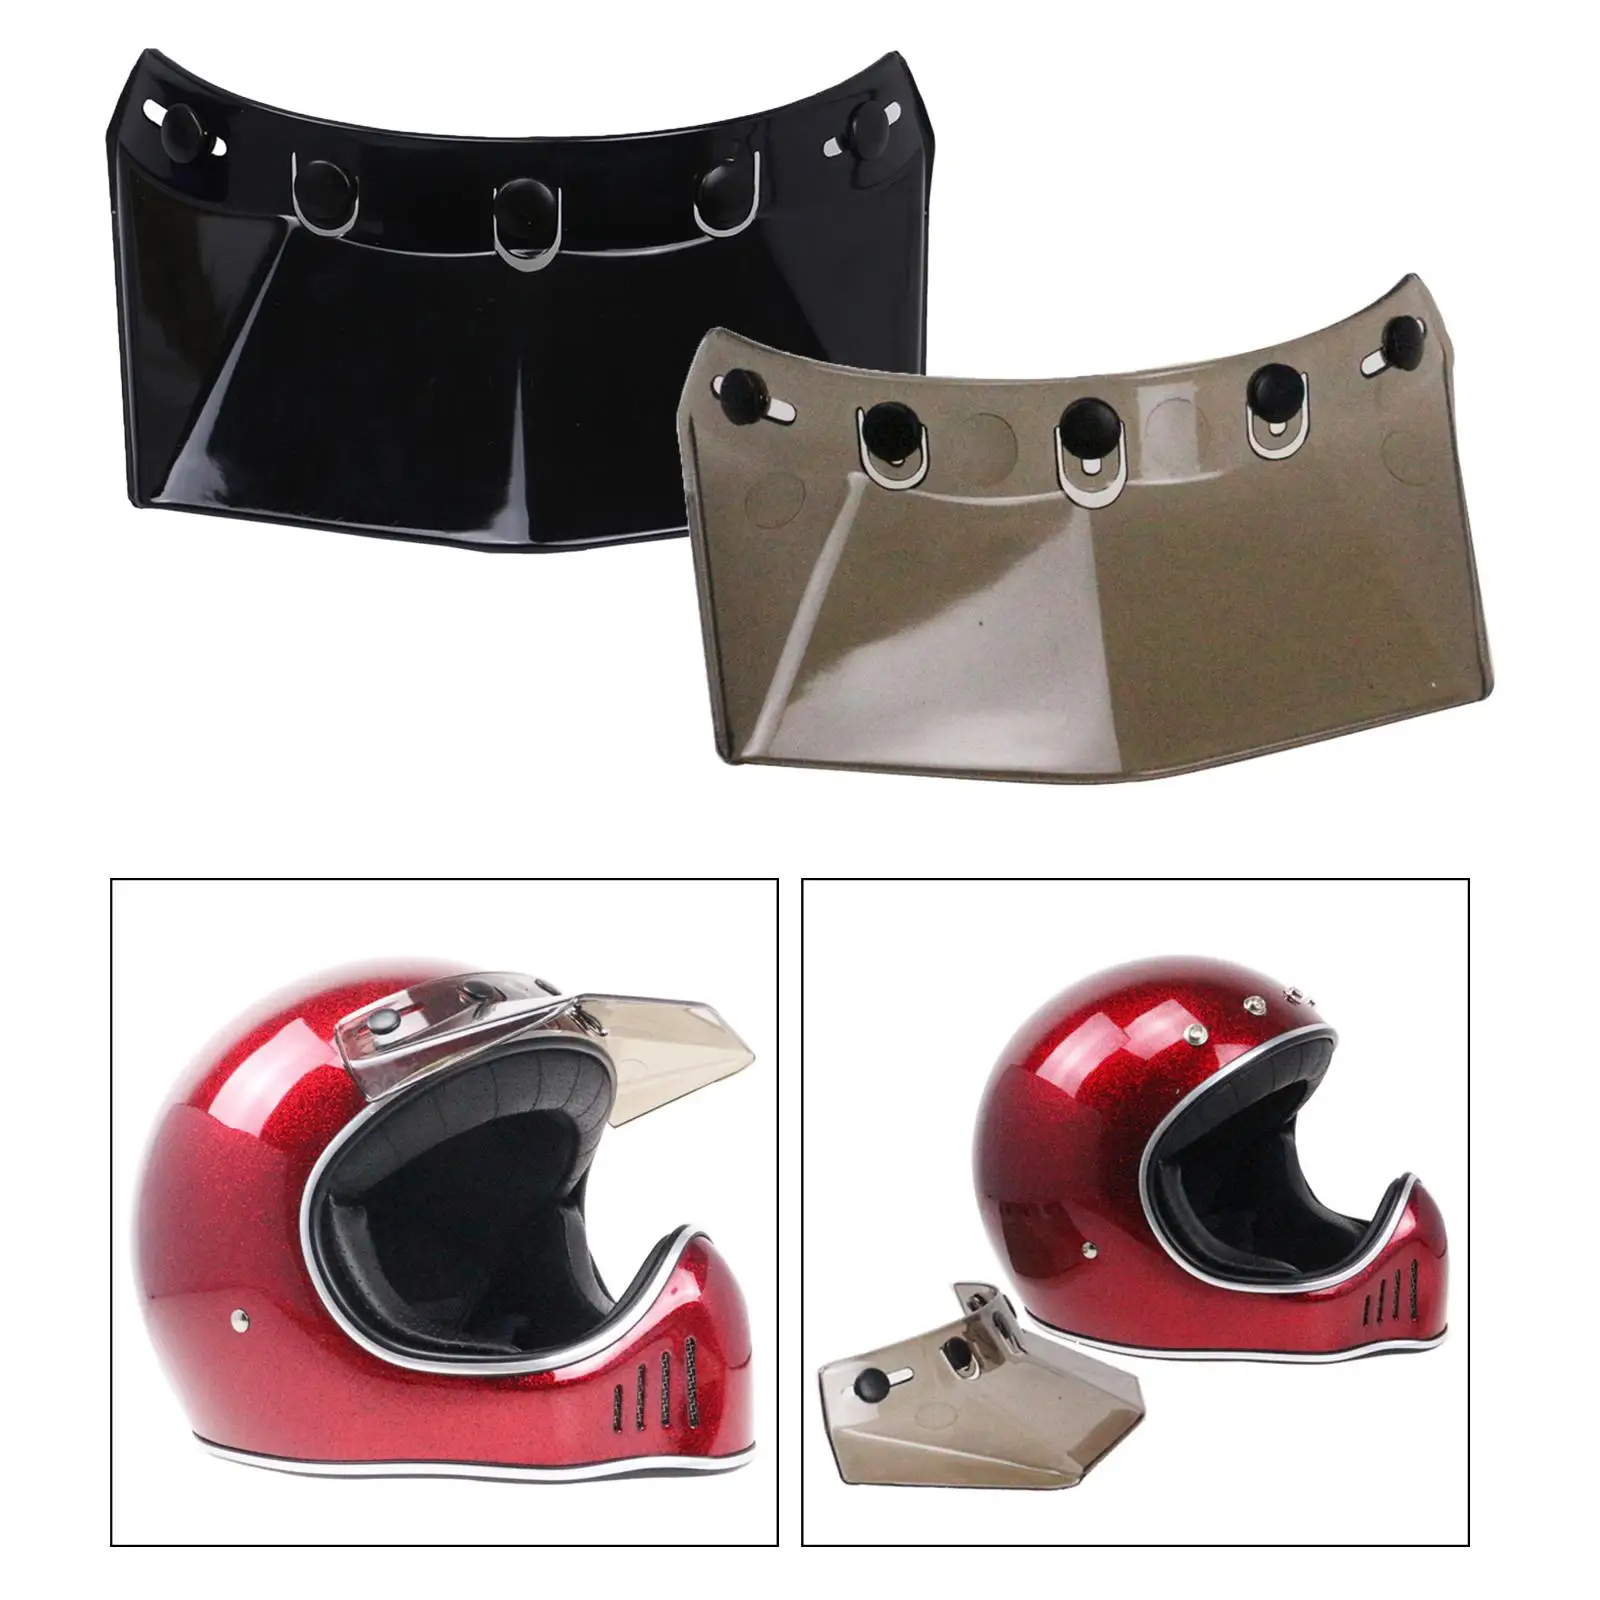 2x 5  Adjustable Visor  Replace for Motorcycle  Accessories